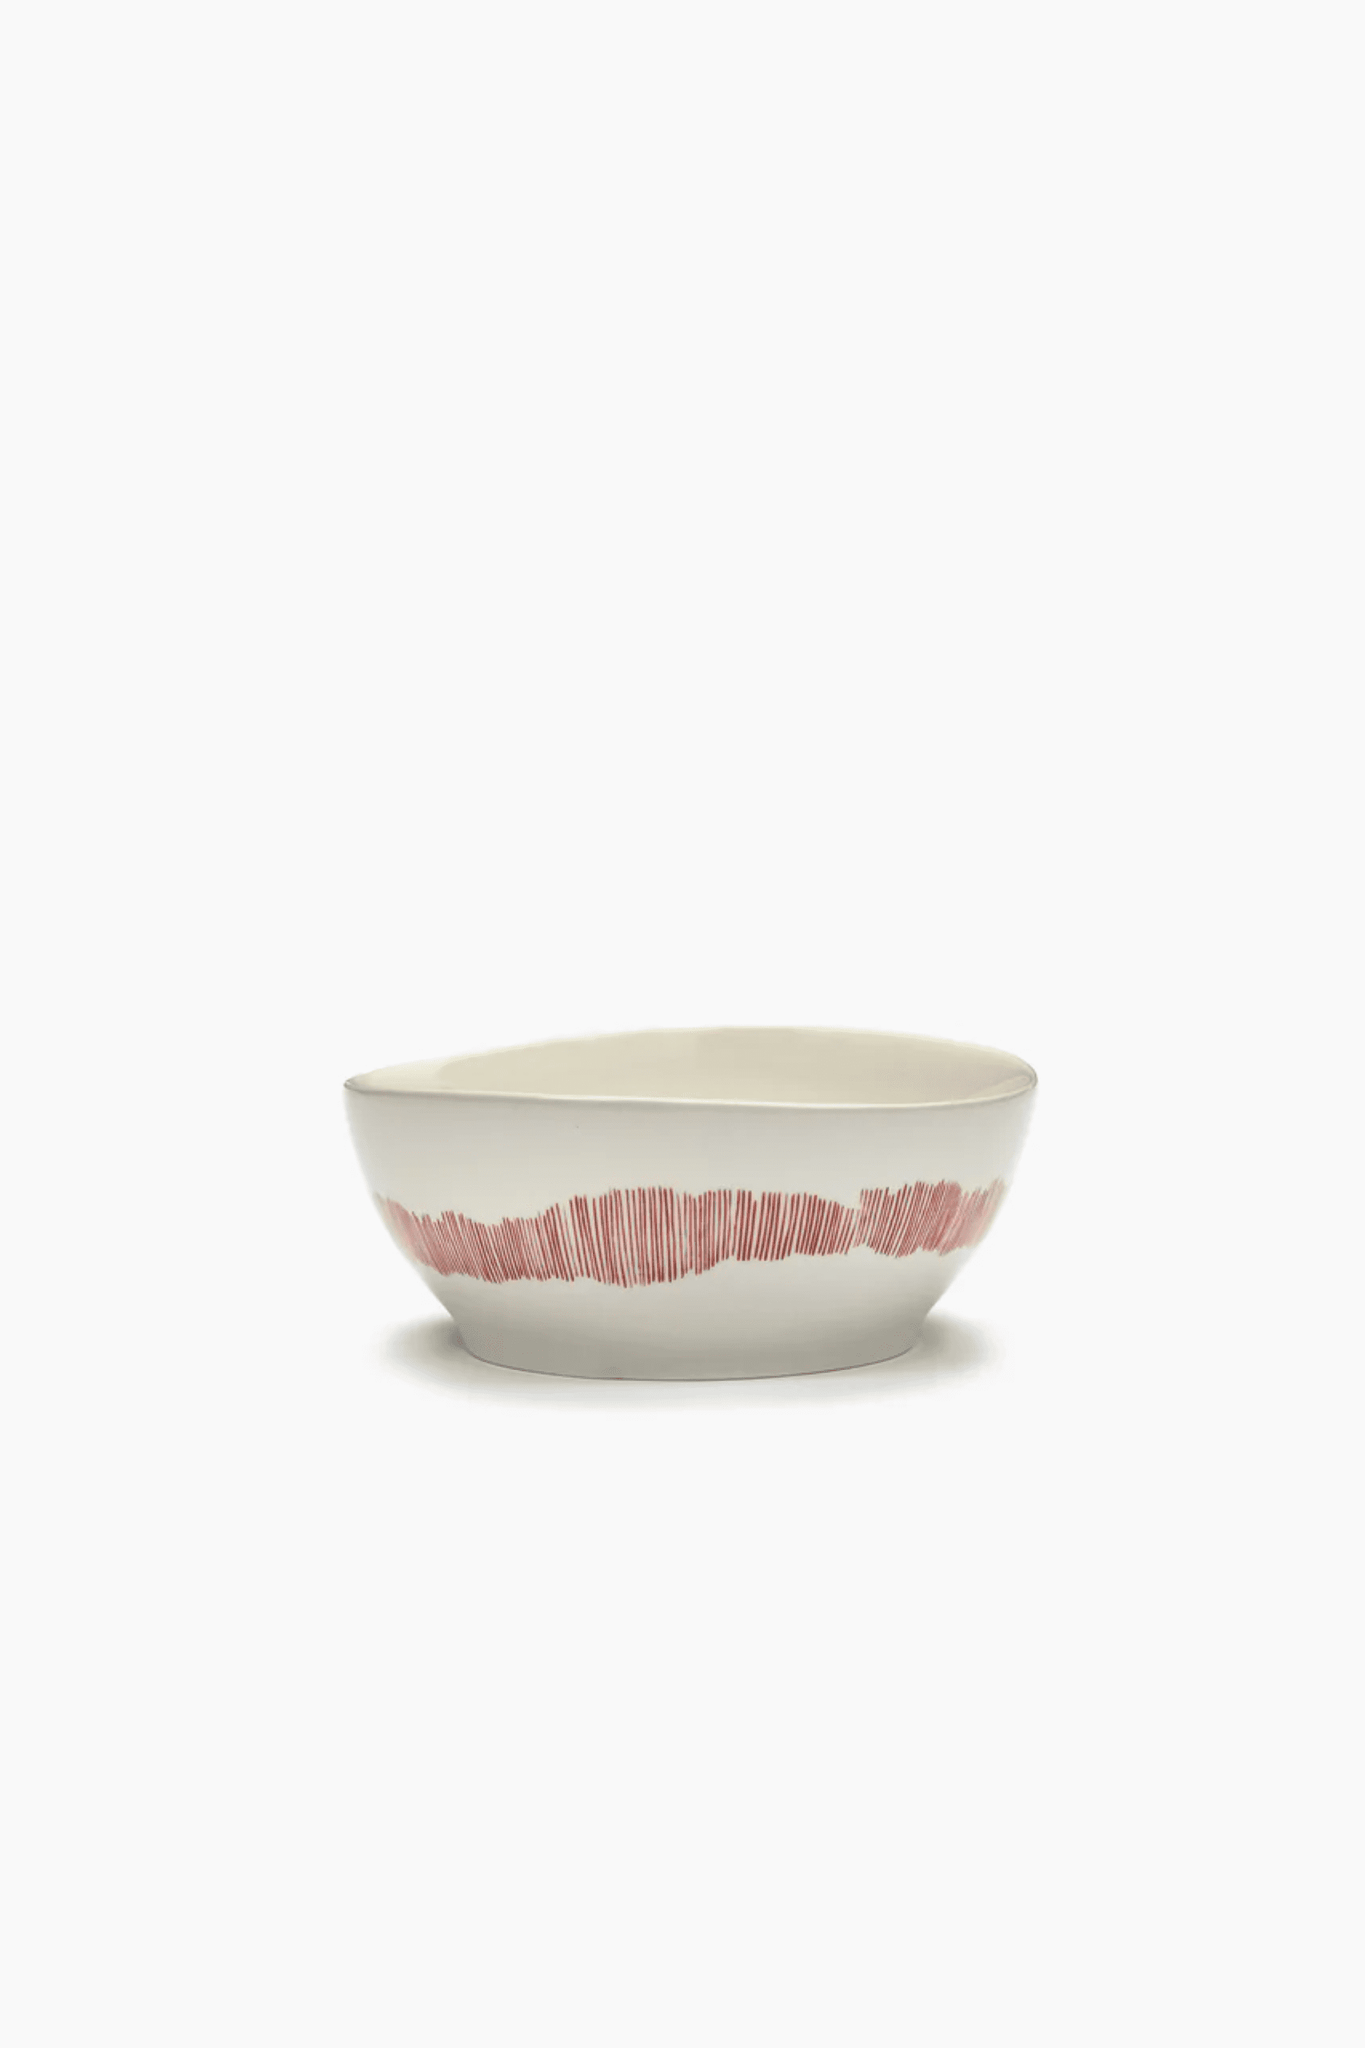 Set of 4 Large Bowls, White Swirl with Red Stripes Ottolenghi Serax, side view